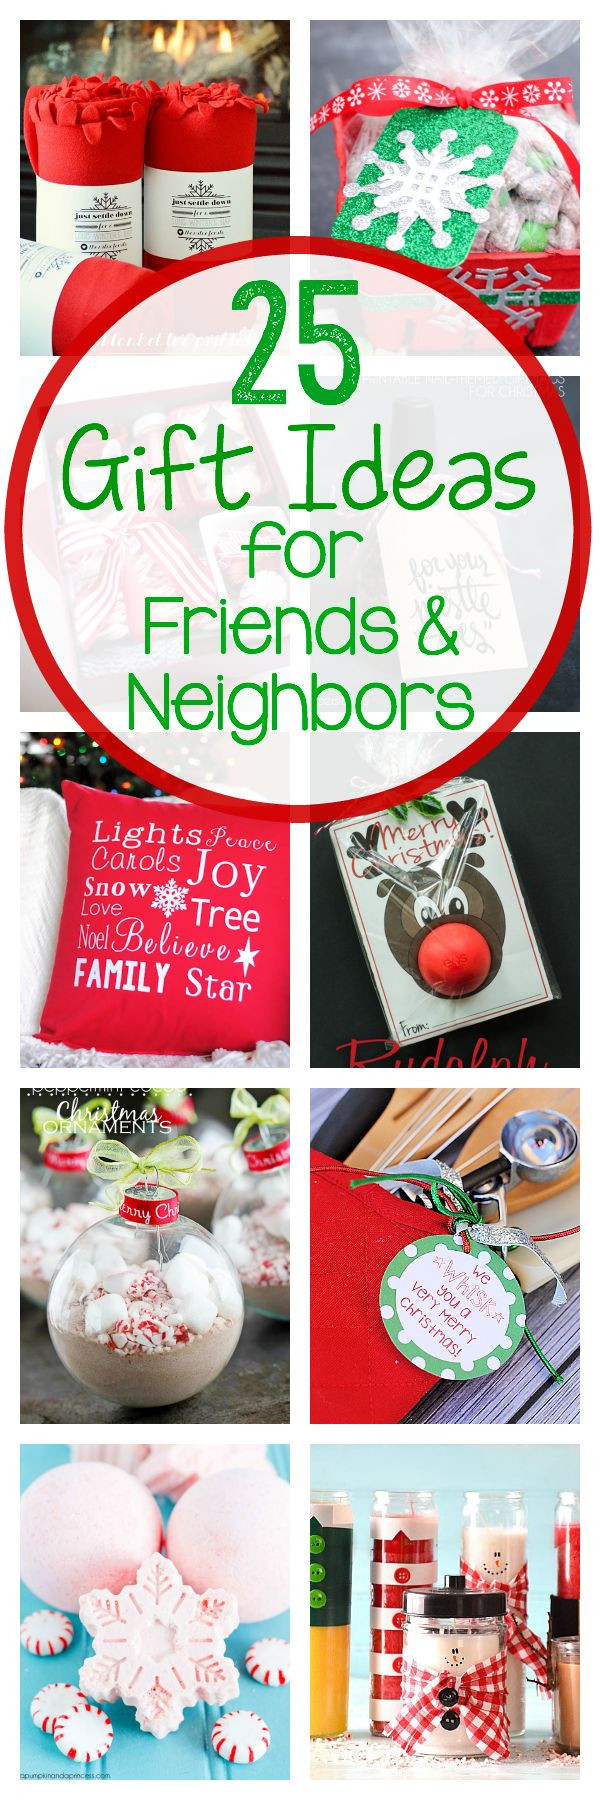 Thank You Gift Ideas For Neighbors
 182 best images about Helper Gift Ideas on Pinterest